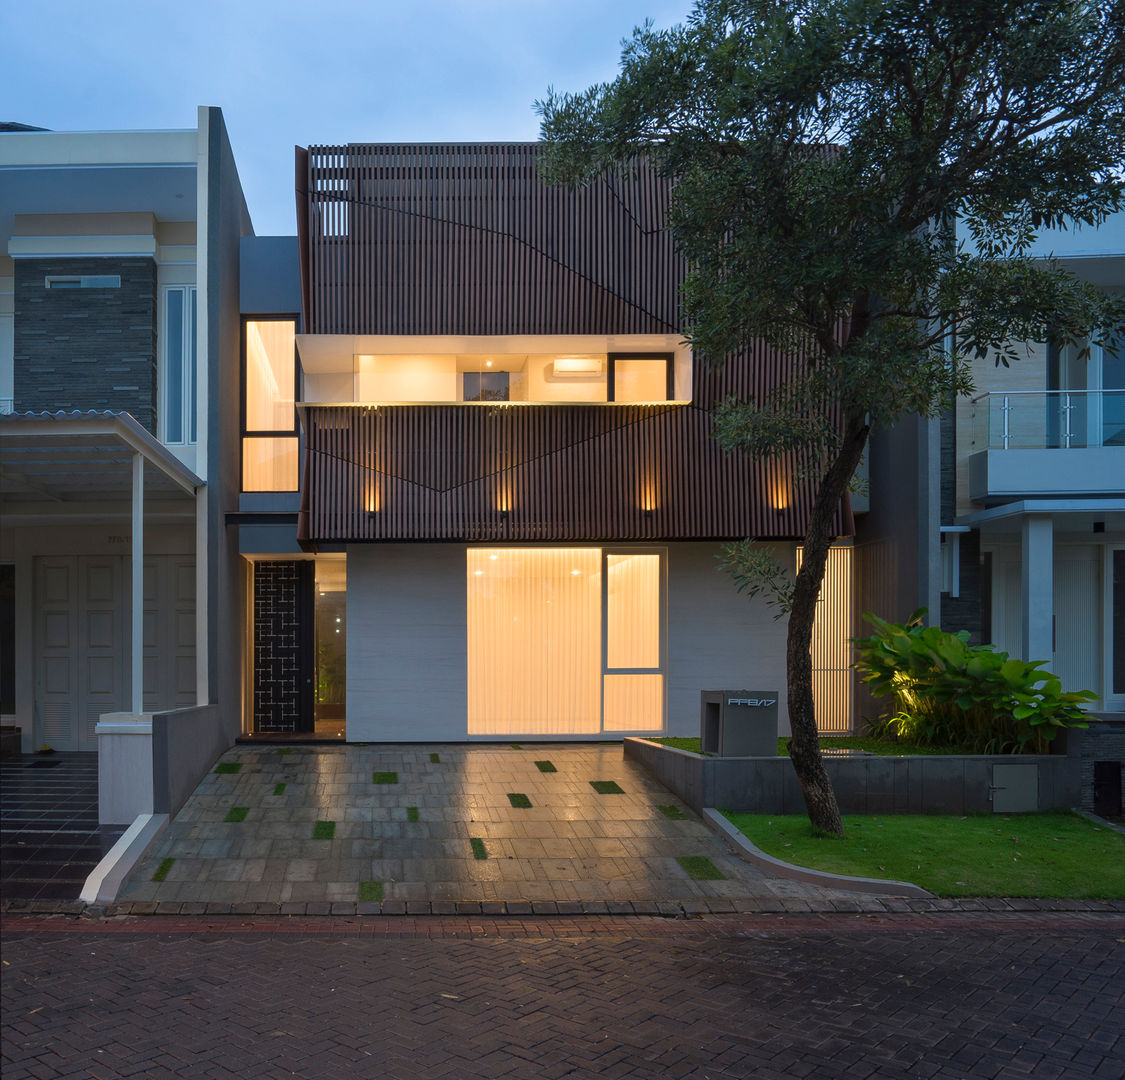 'S' house, Simple Projects Architecture Simple Projects Architecture Rumah Tropis Besi/Baja